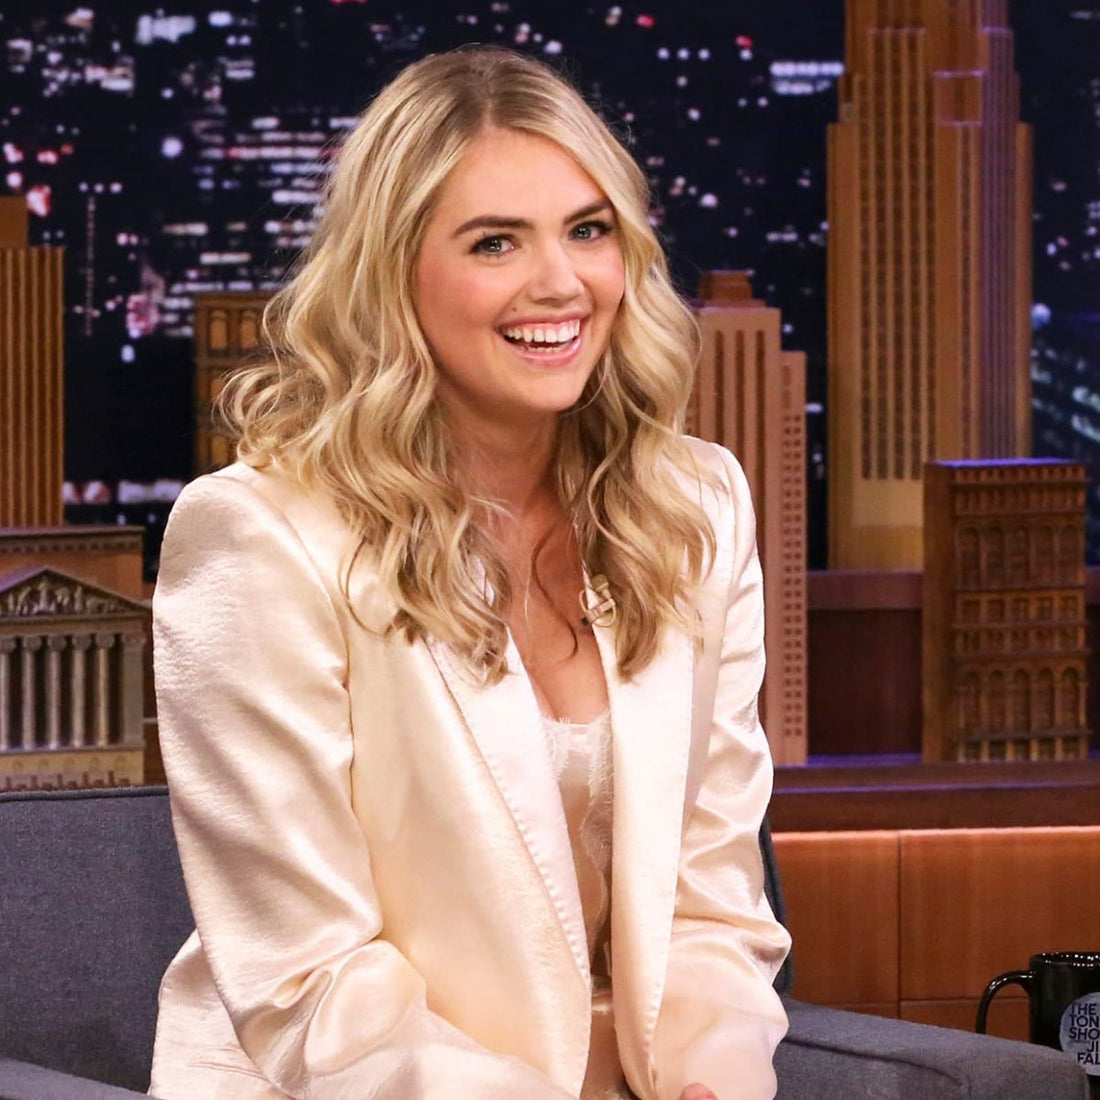 Shape: Kate Upton Crowdsourced Instagram for the Best Face Masks—Here Are Some of Her Favorites